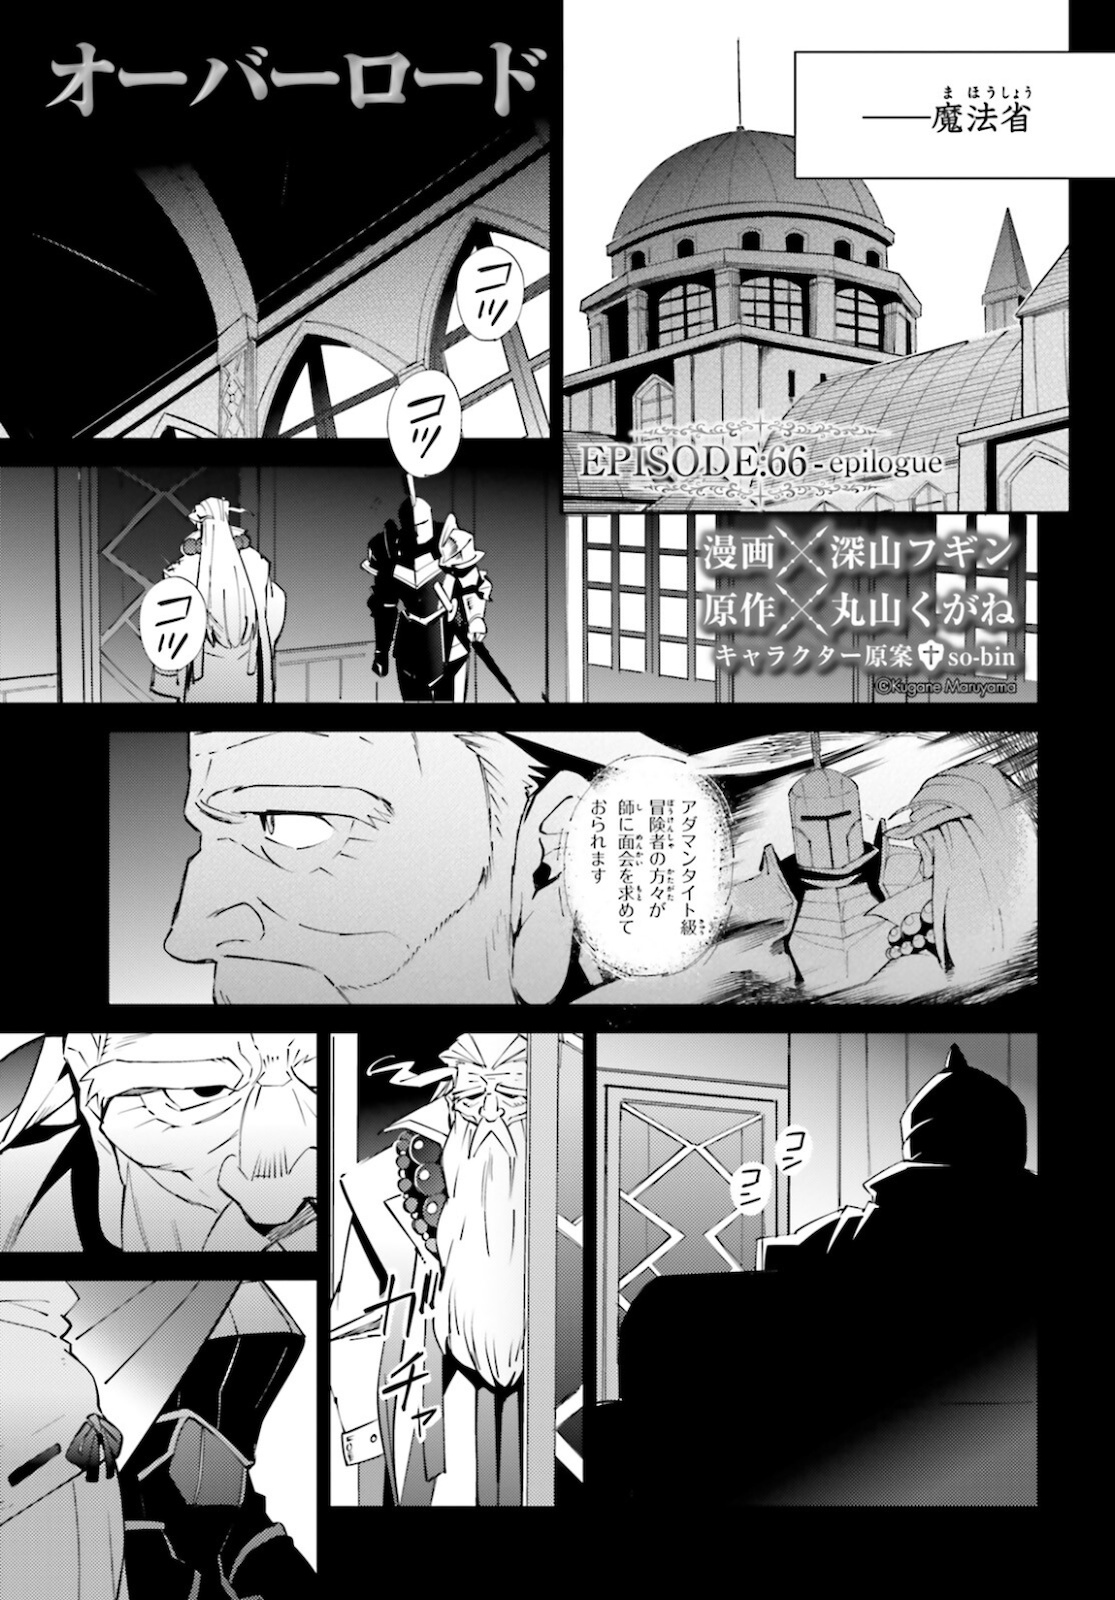 Overlord - Chapter 66.5 - Page 1